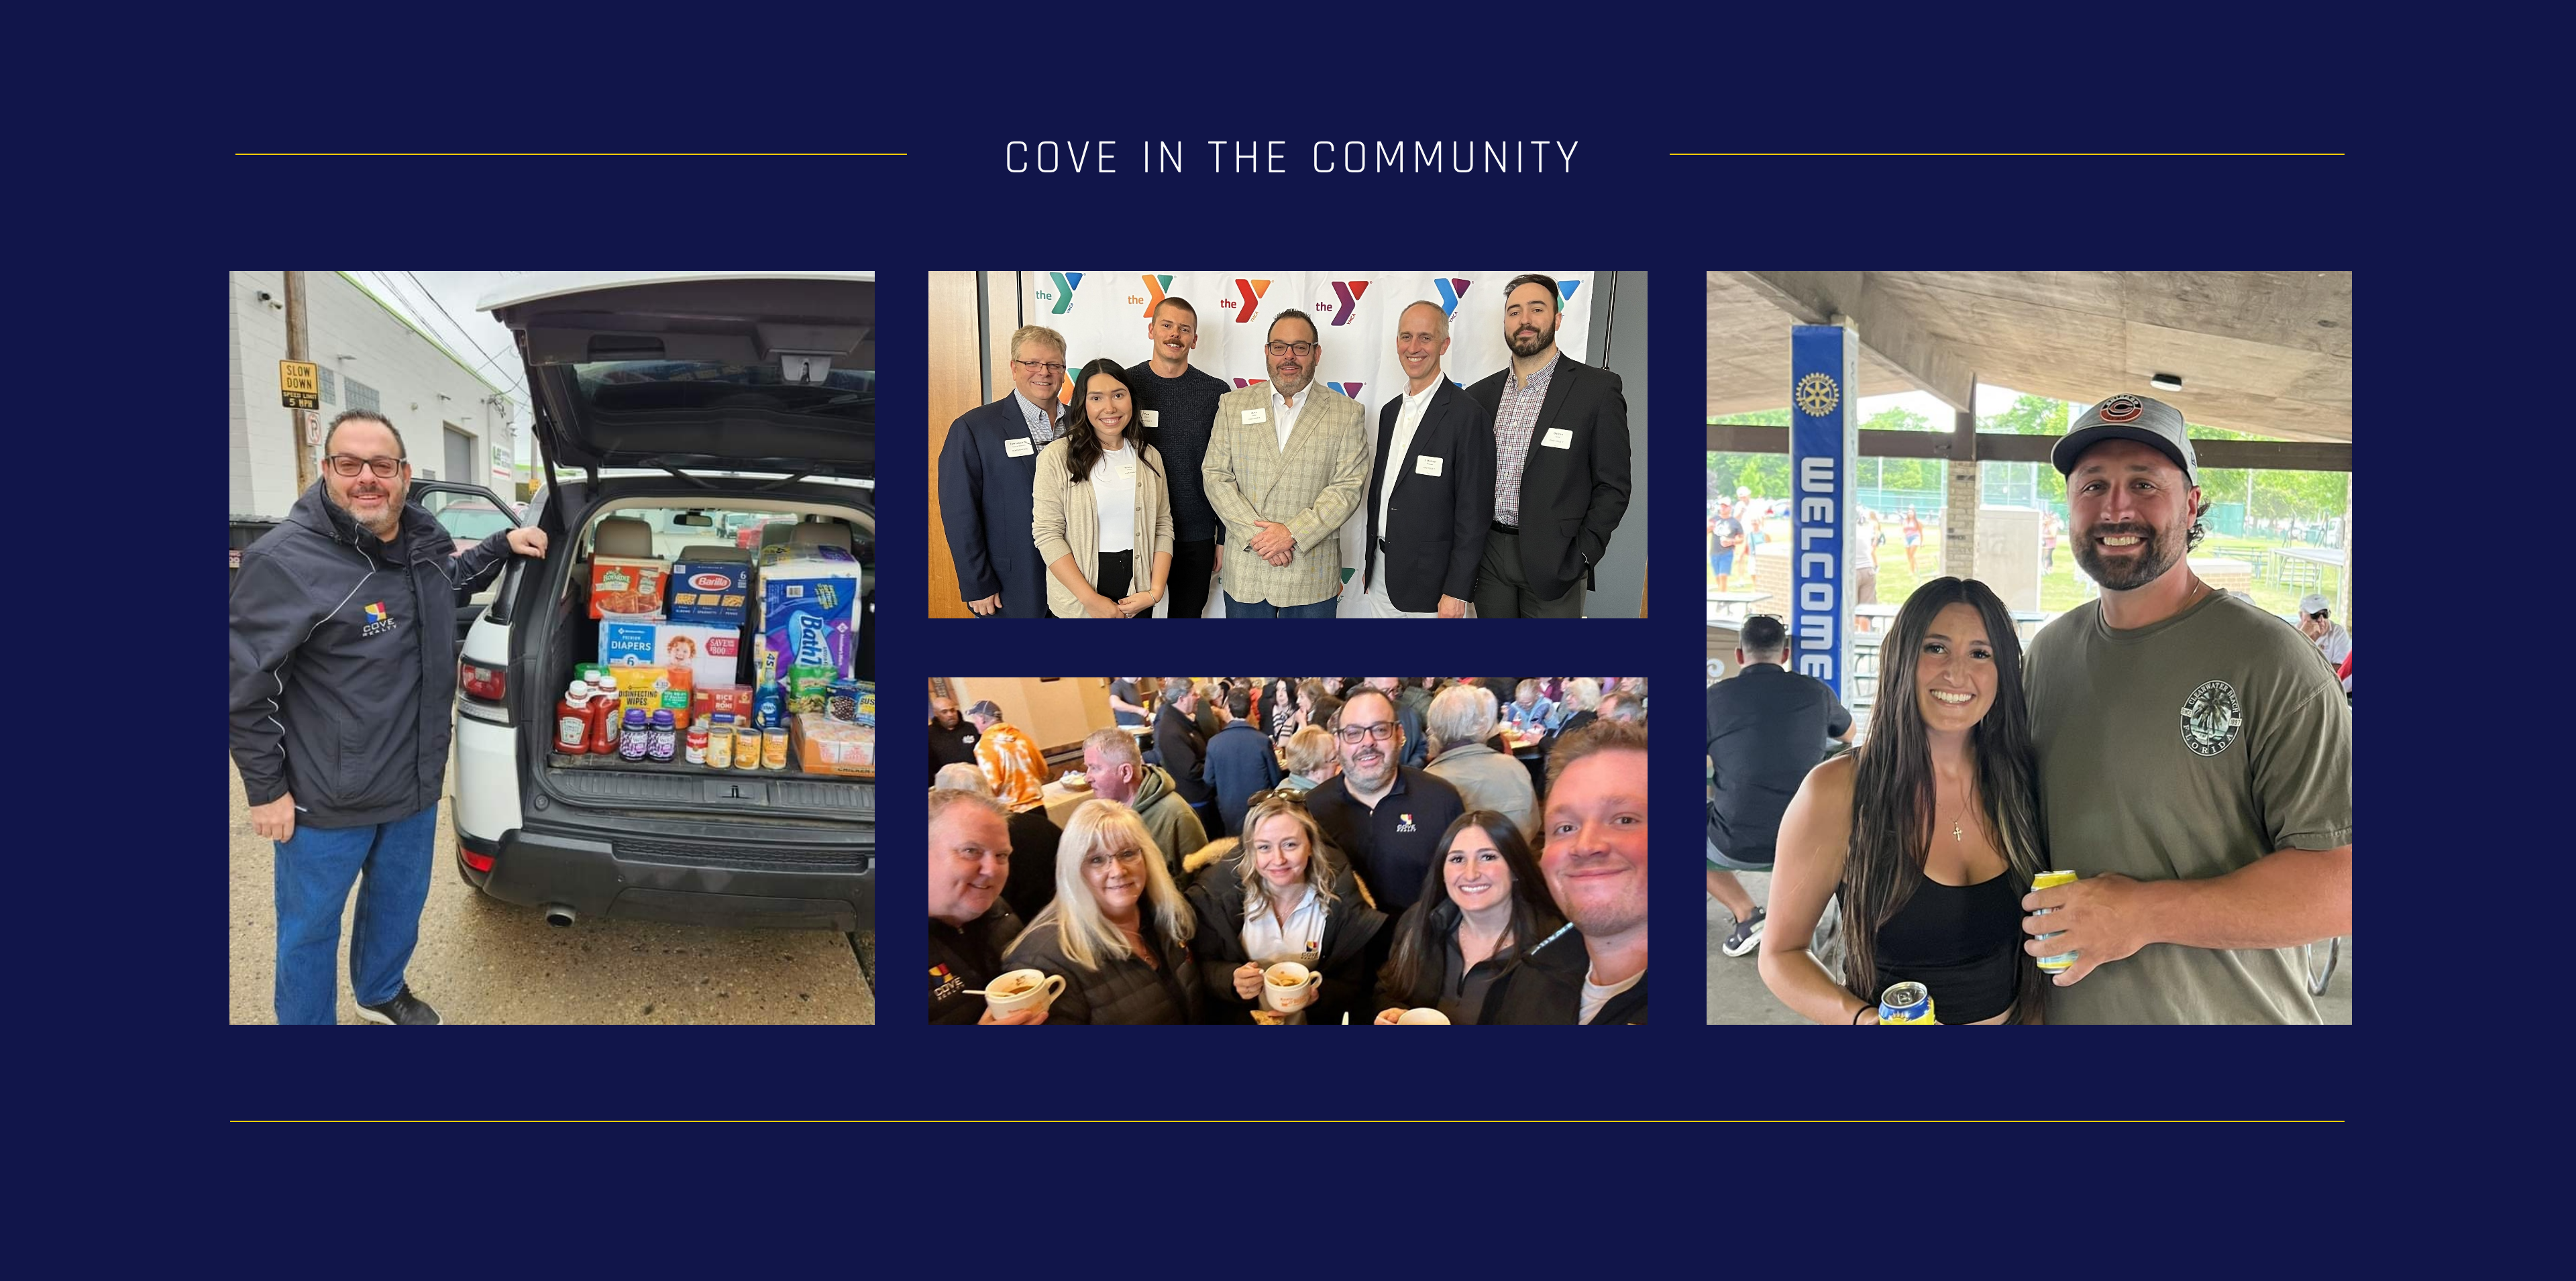 Cove in the Community image collage